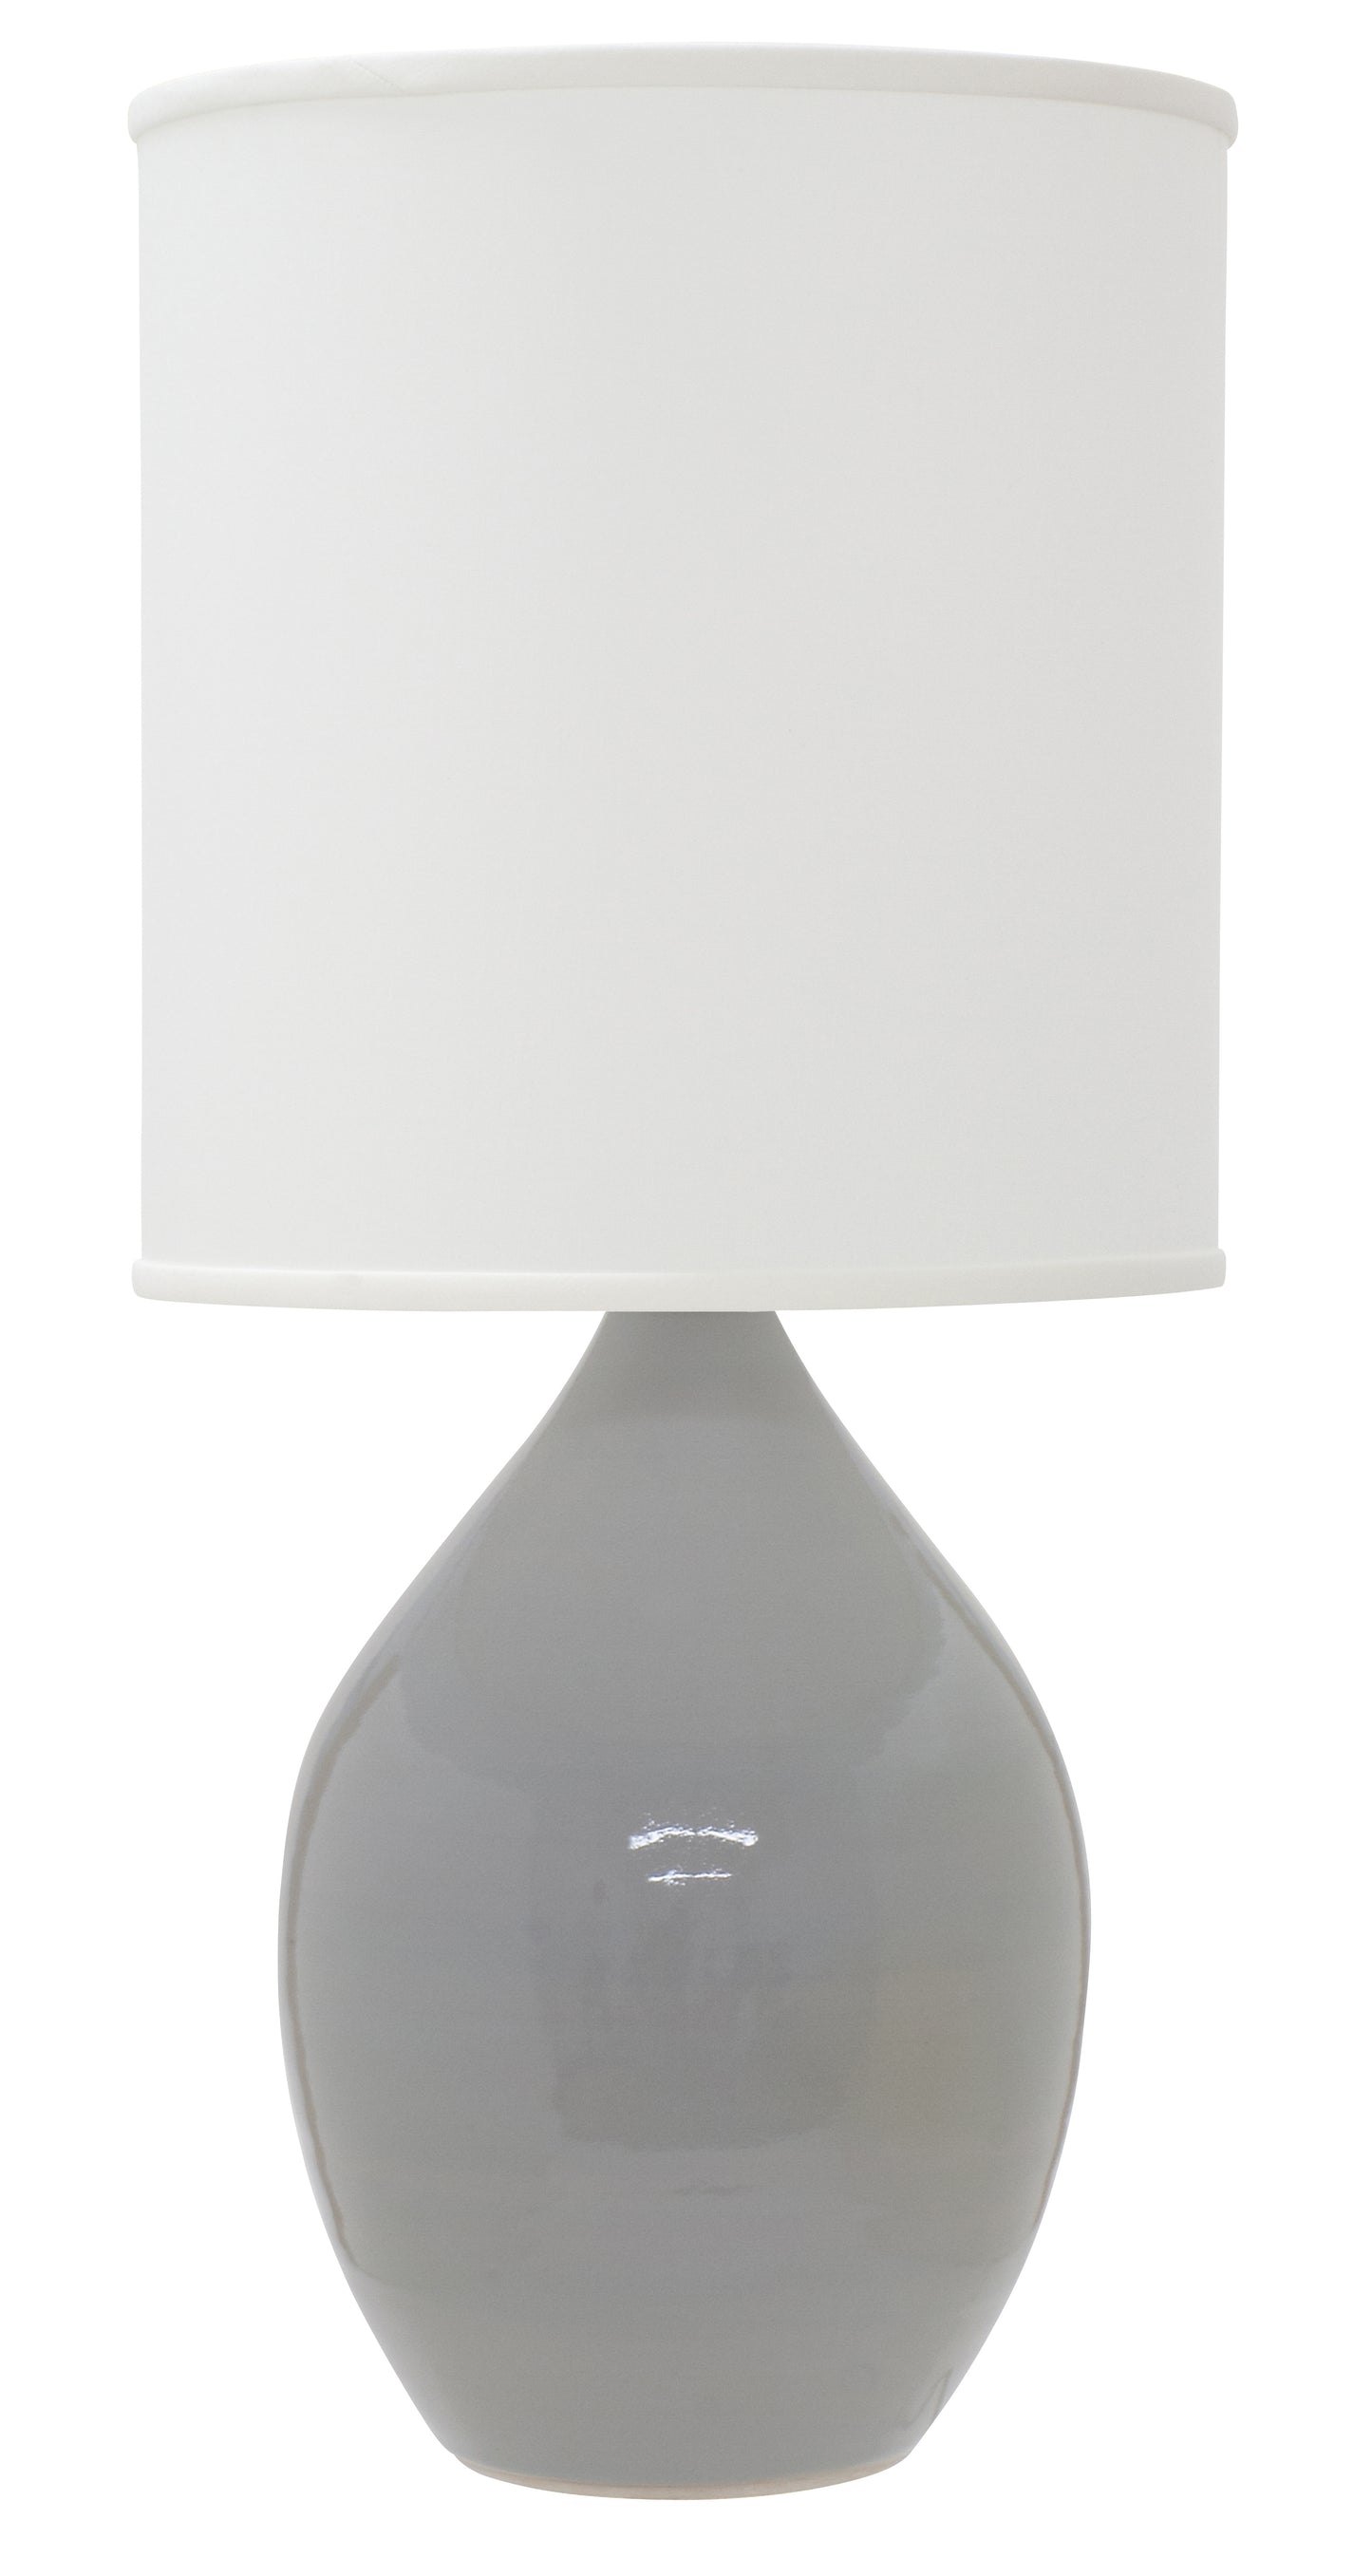 House of Troy Scatchard 20.5" Stoneware Table Lamp in Gray Gloss GS201-GG